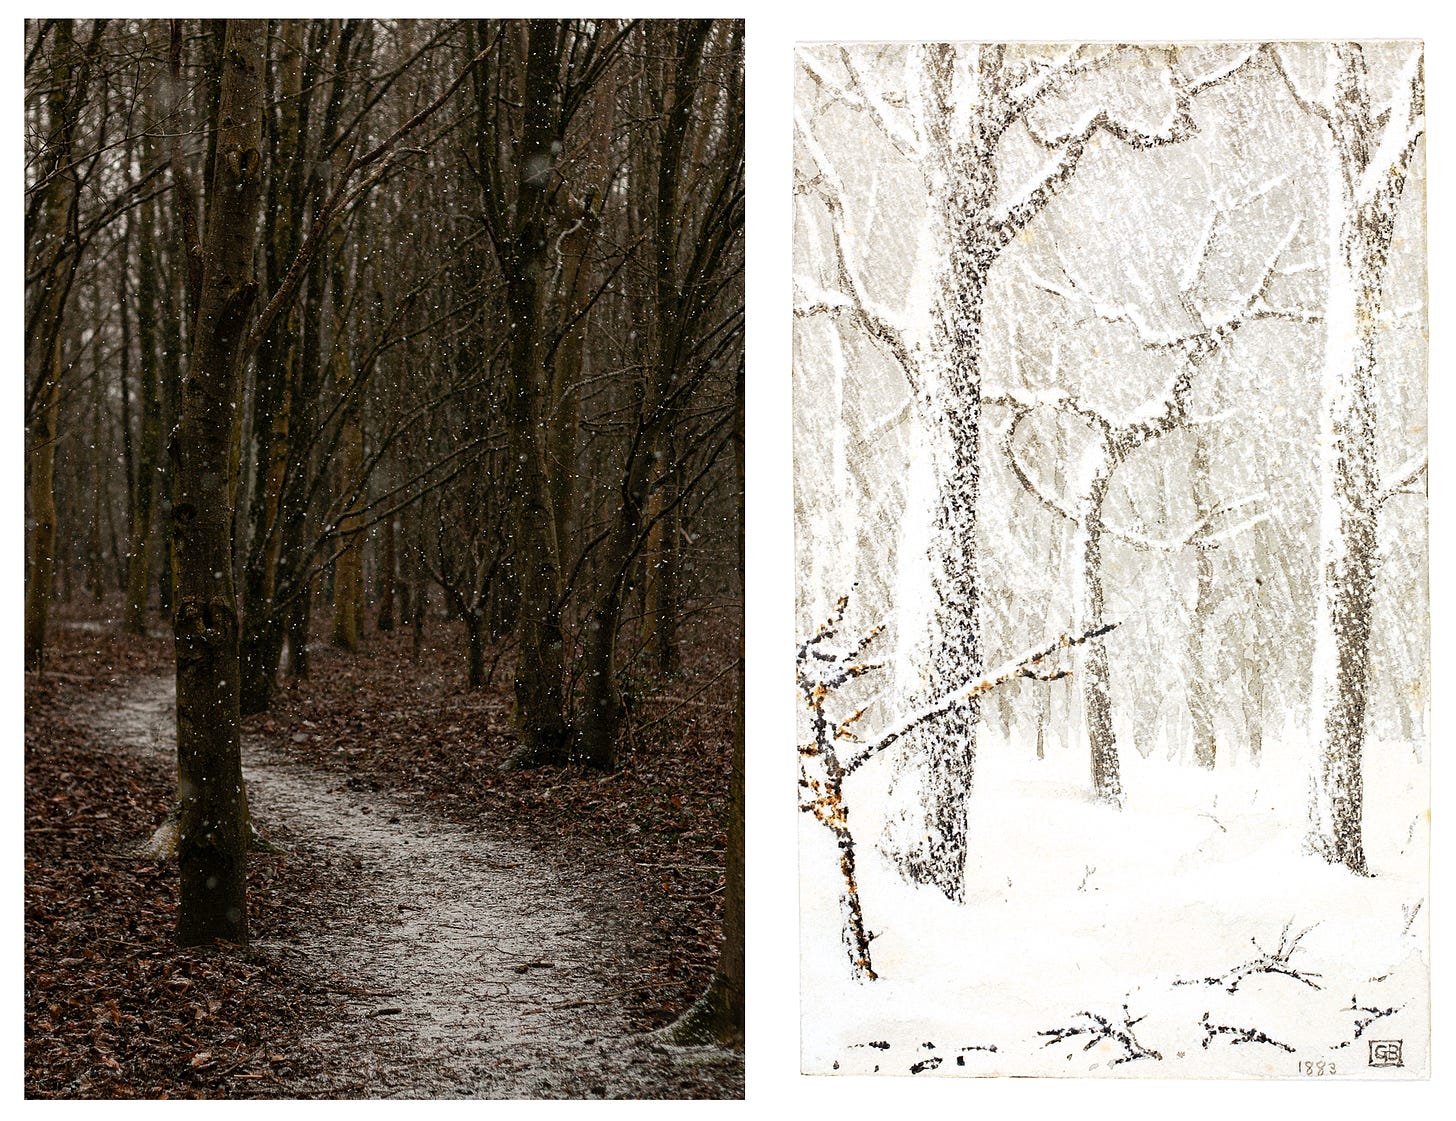 Right image is a photograph of light snow falling through a sparse winter woodland, a path winding through the trees, is filling with snow. Left image is a painting of heavy snow falling in a woodland, the ground is completely white. 